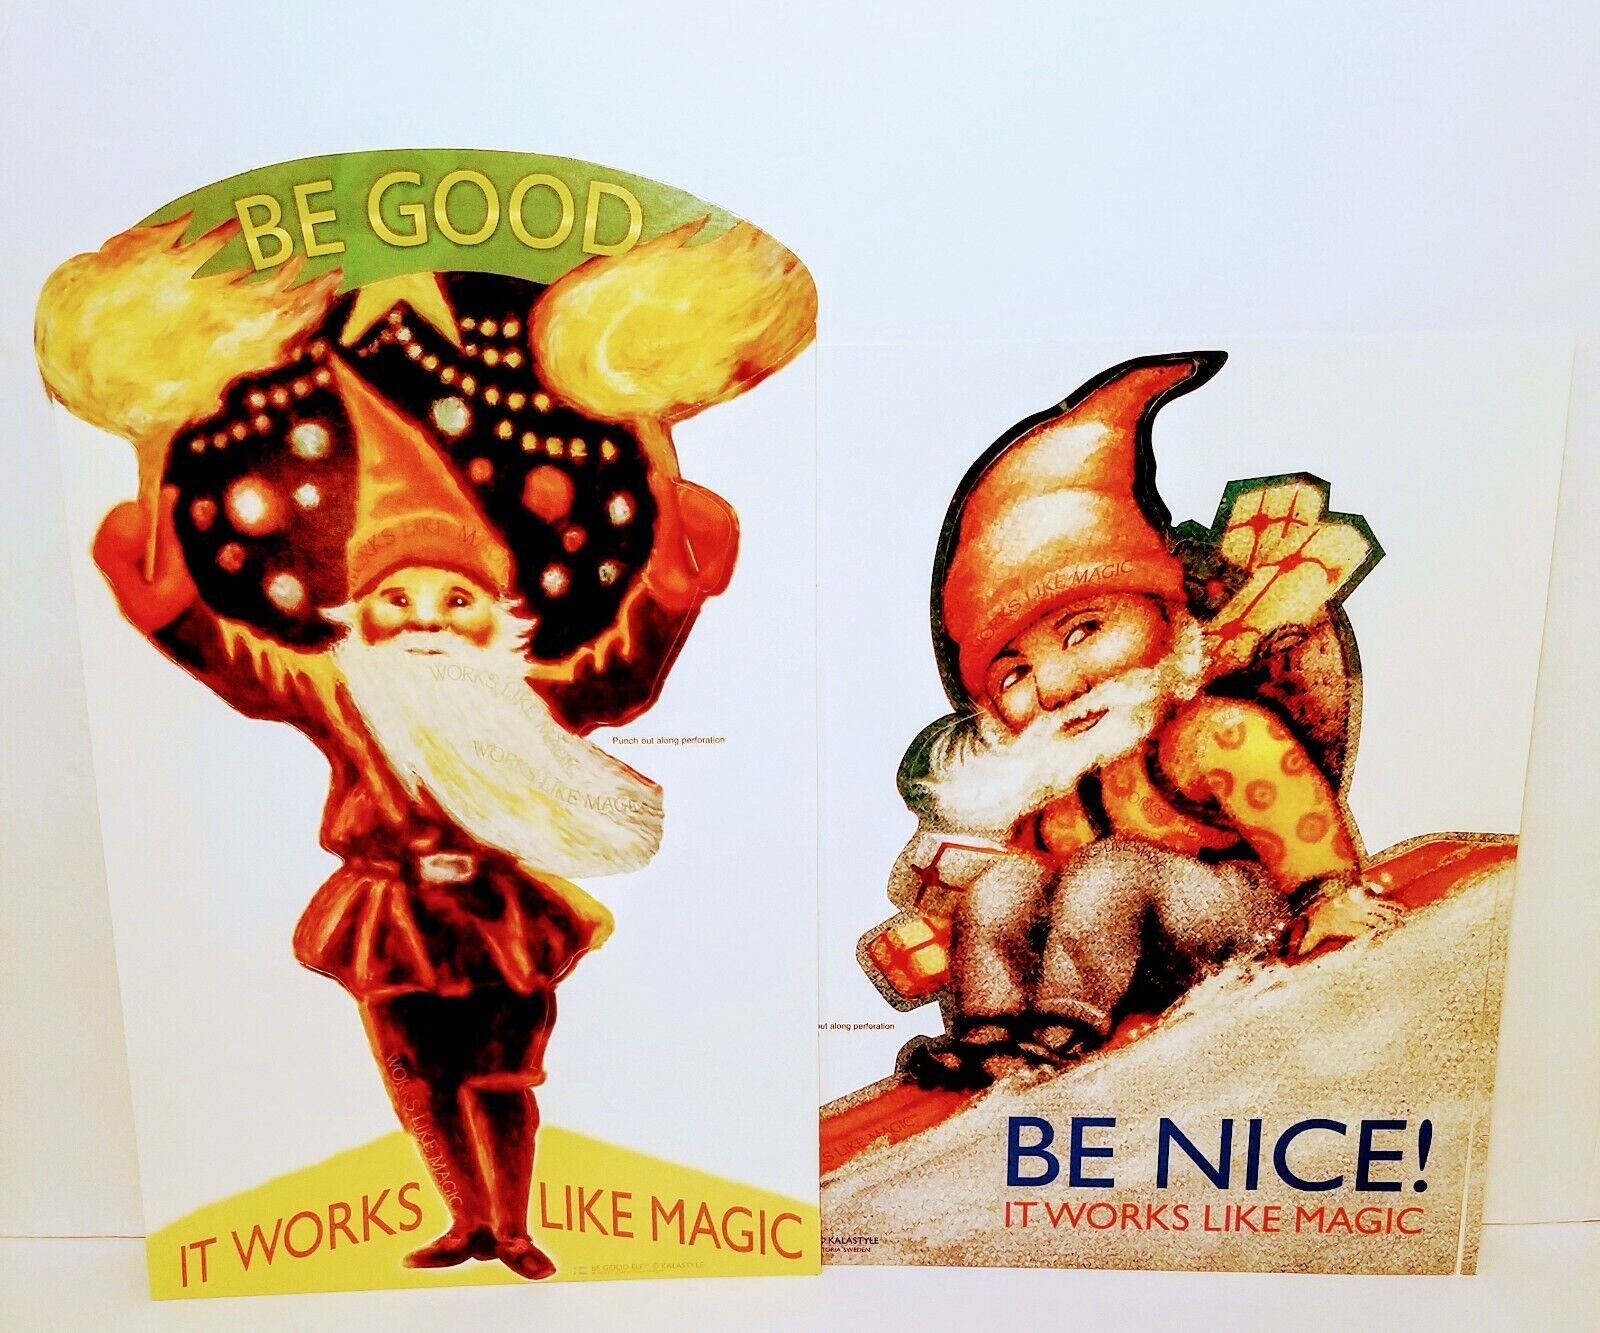 2 New Kalastyle Elf Soap Cardboard Signs Be Good/Be Nice-It Works Like Magic